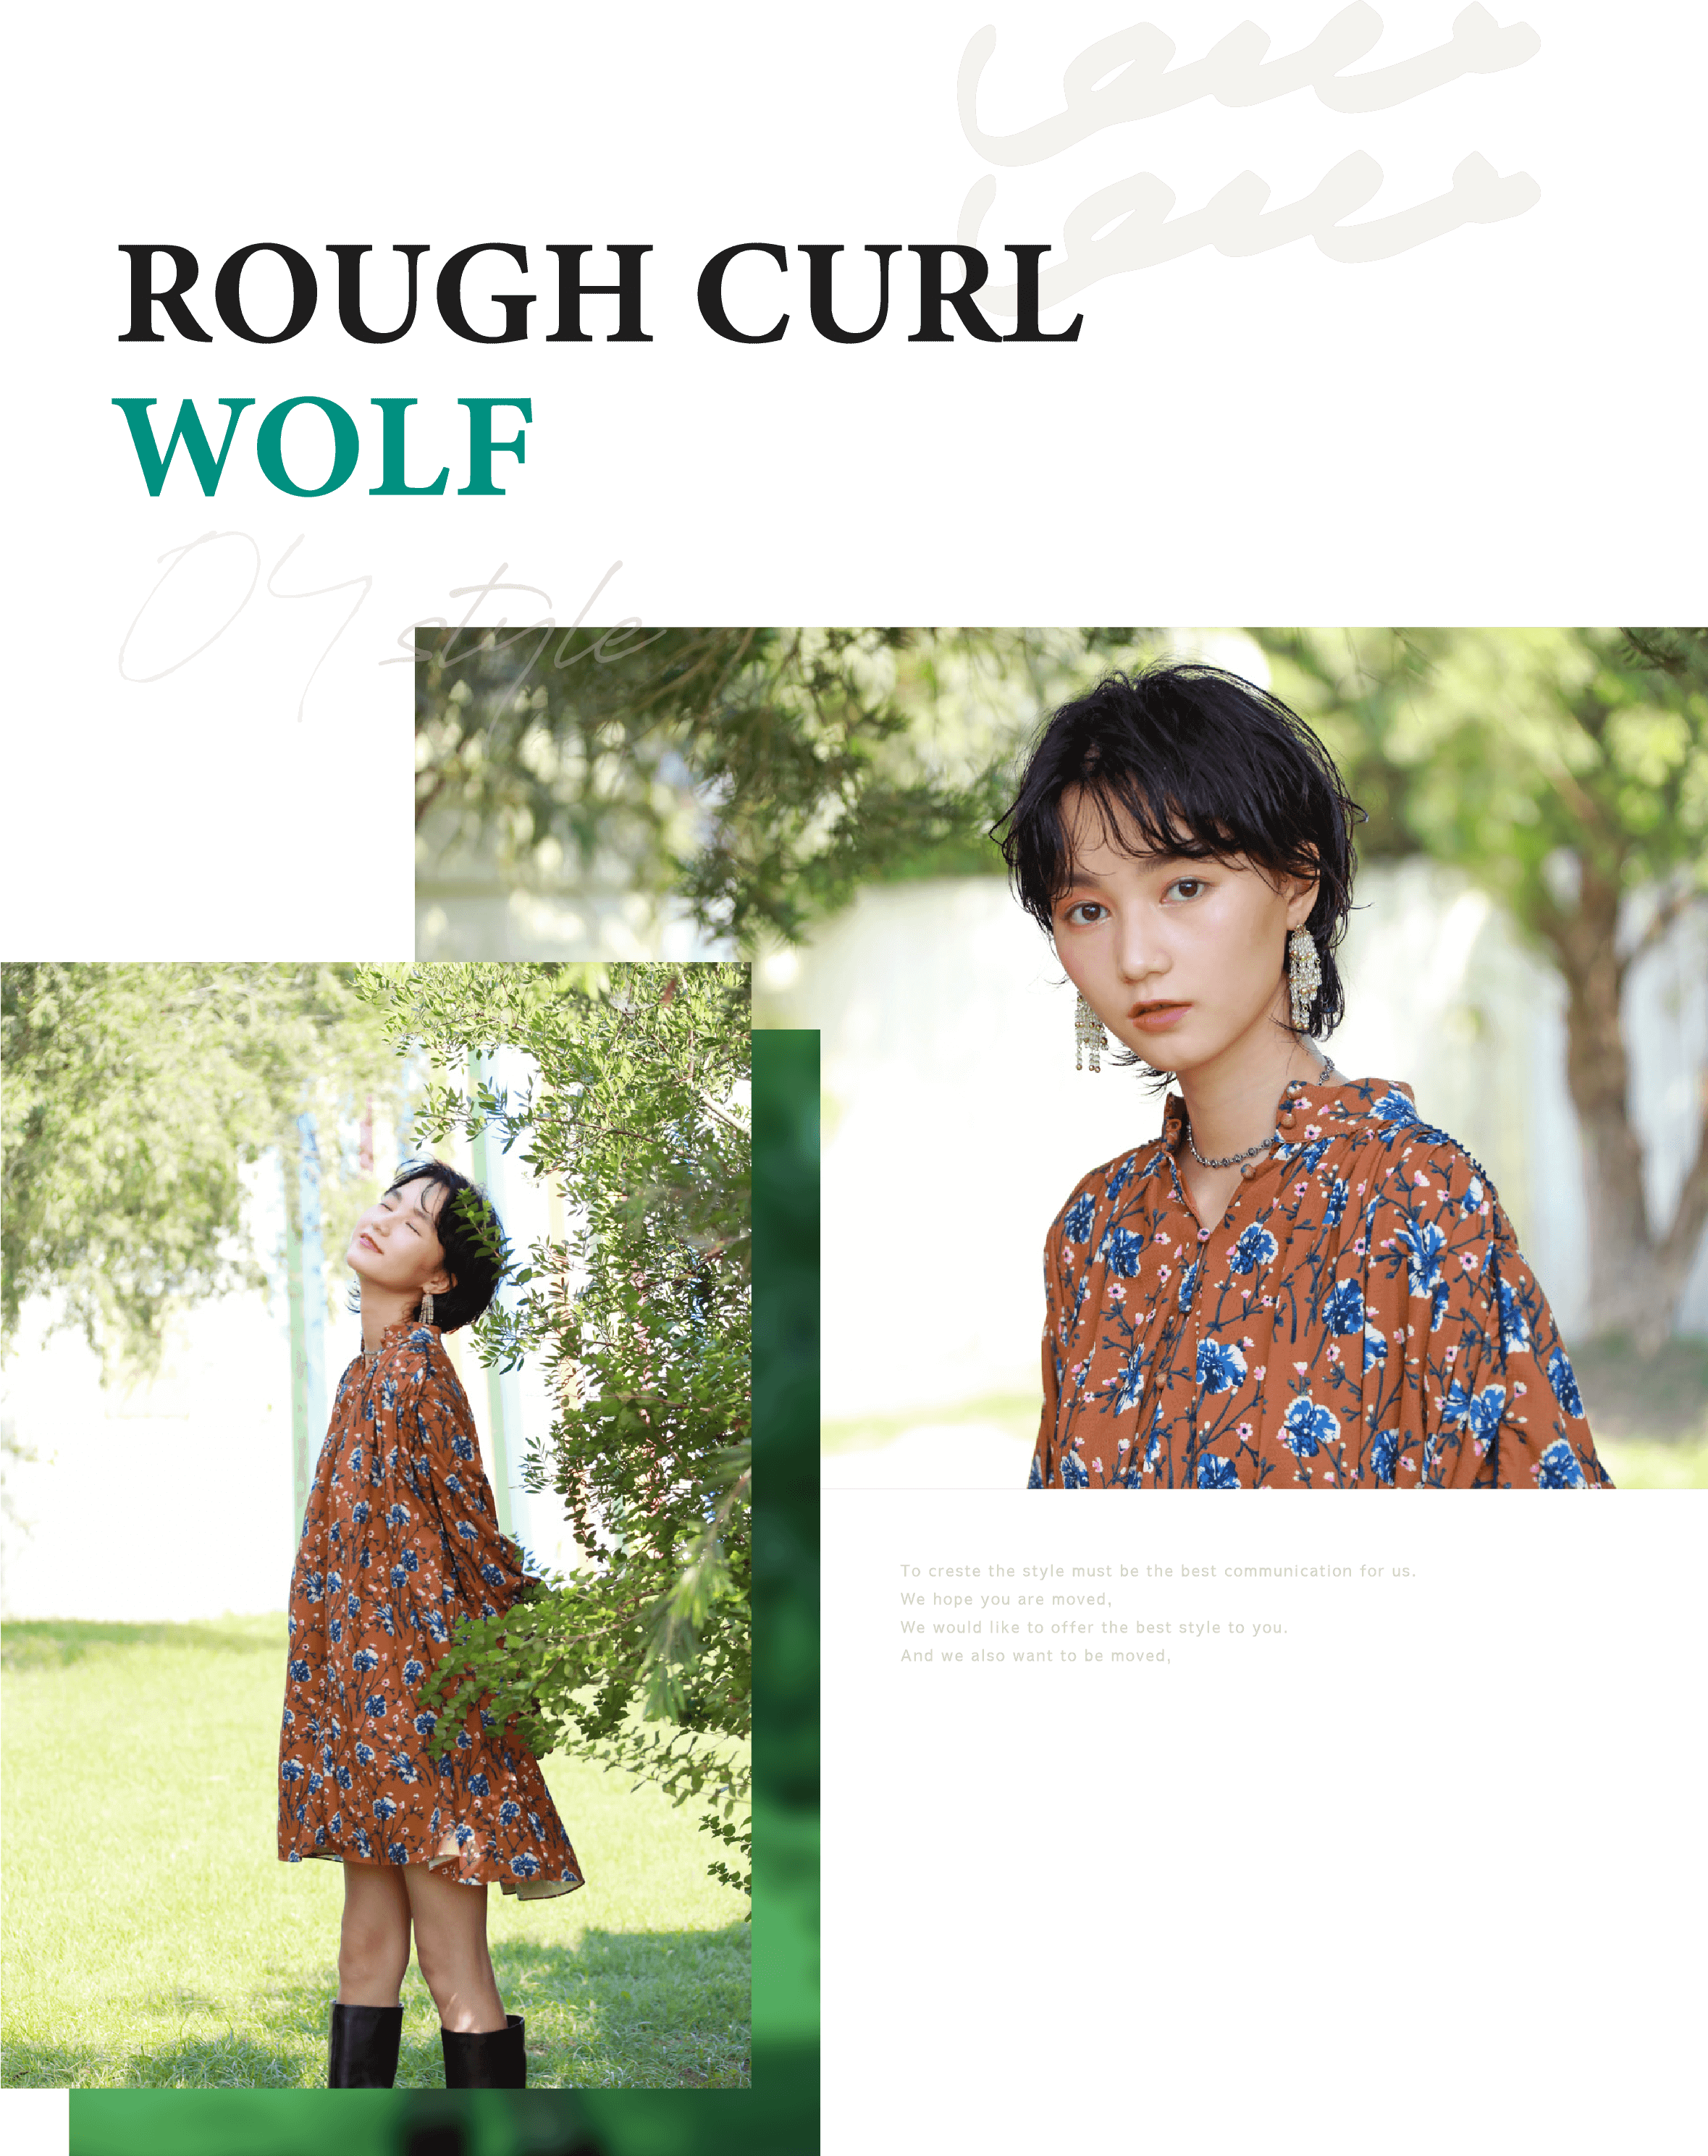 ROUGH CURL WOLF To creste the style must be the best communication for us. We hope you are moved, We would like to offer the best style to you. And we also want to be moved,